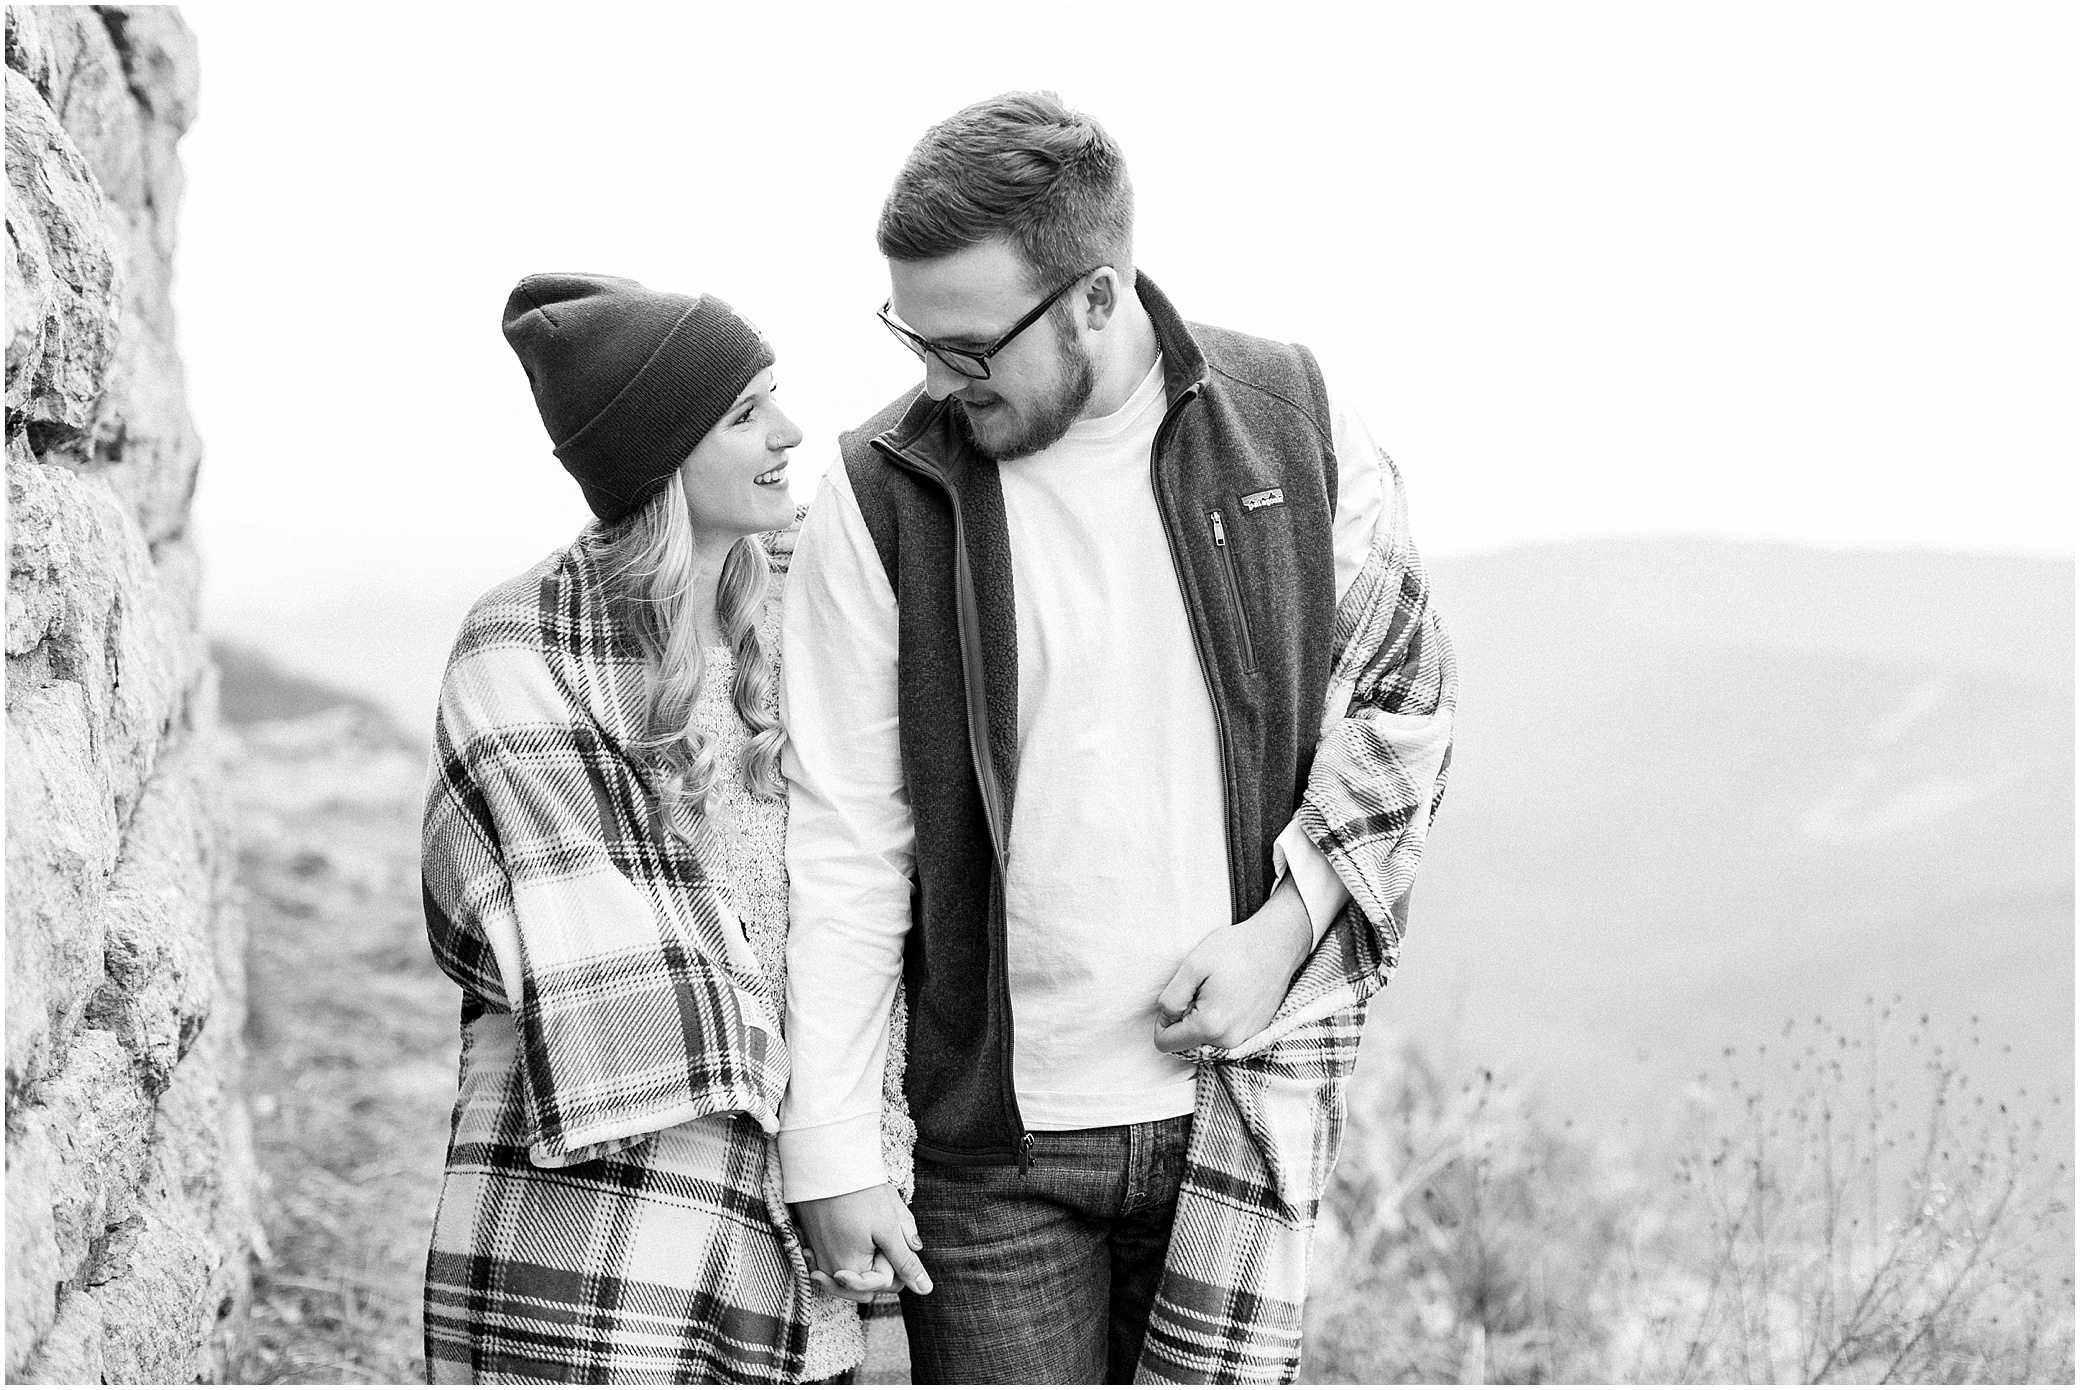 blue ridge parkway engagements, ravens roost candid couple photography, camping couple, hiking couple, adventurous couple